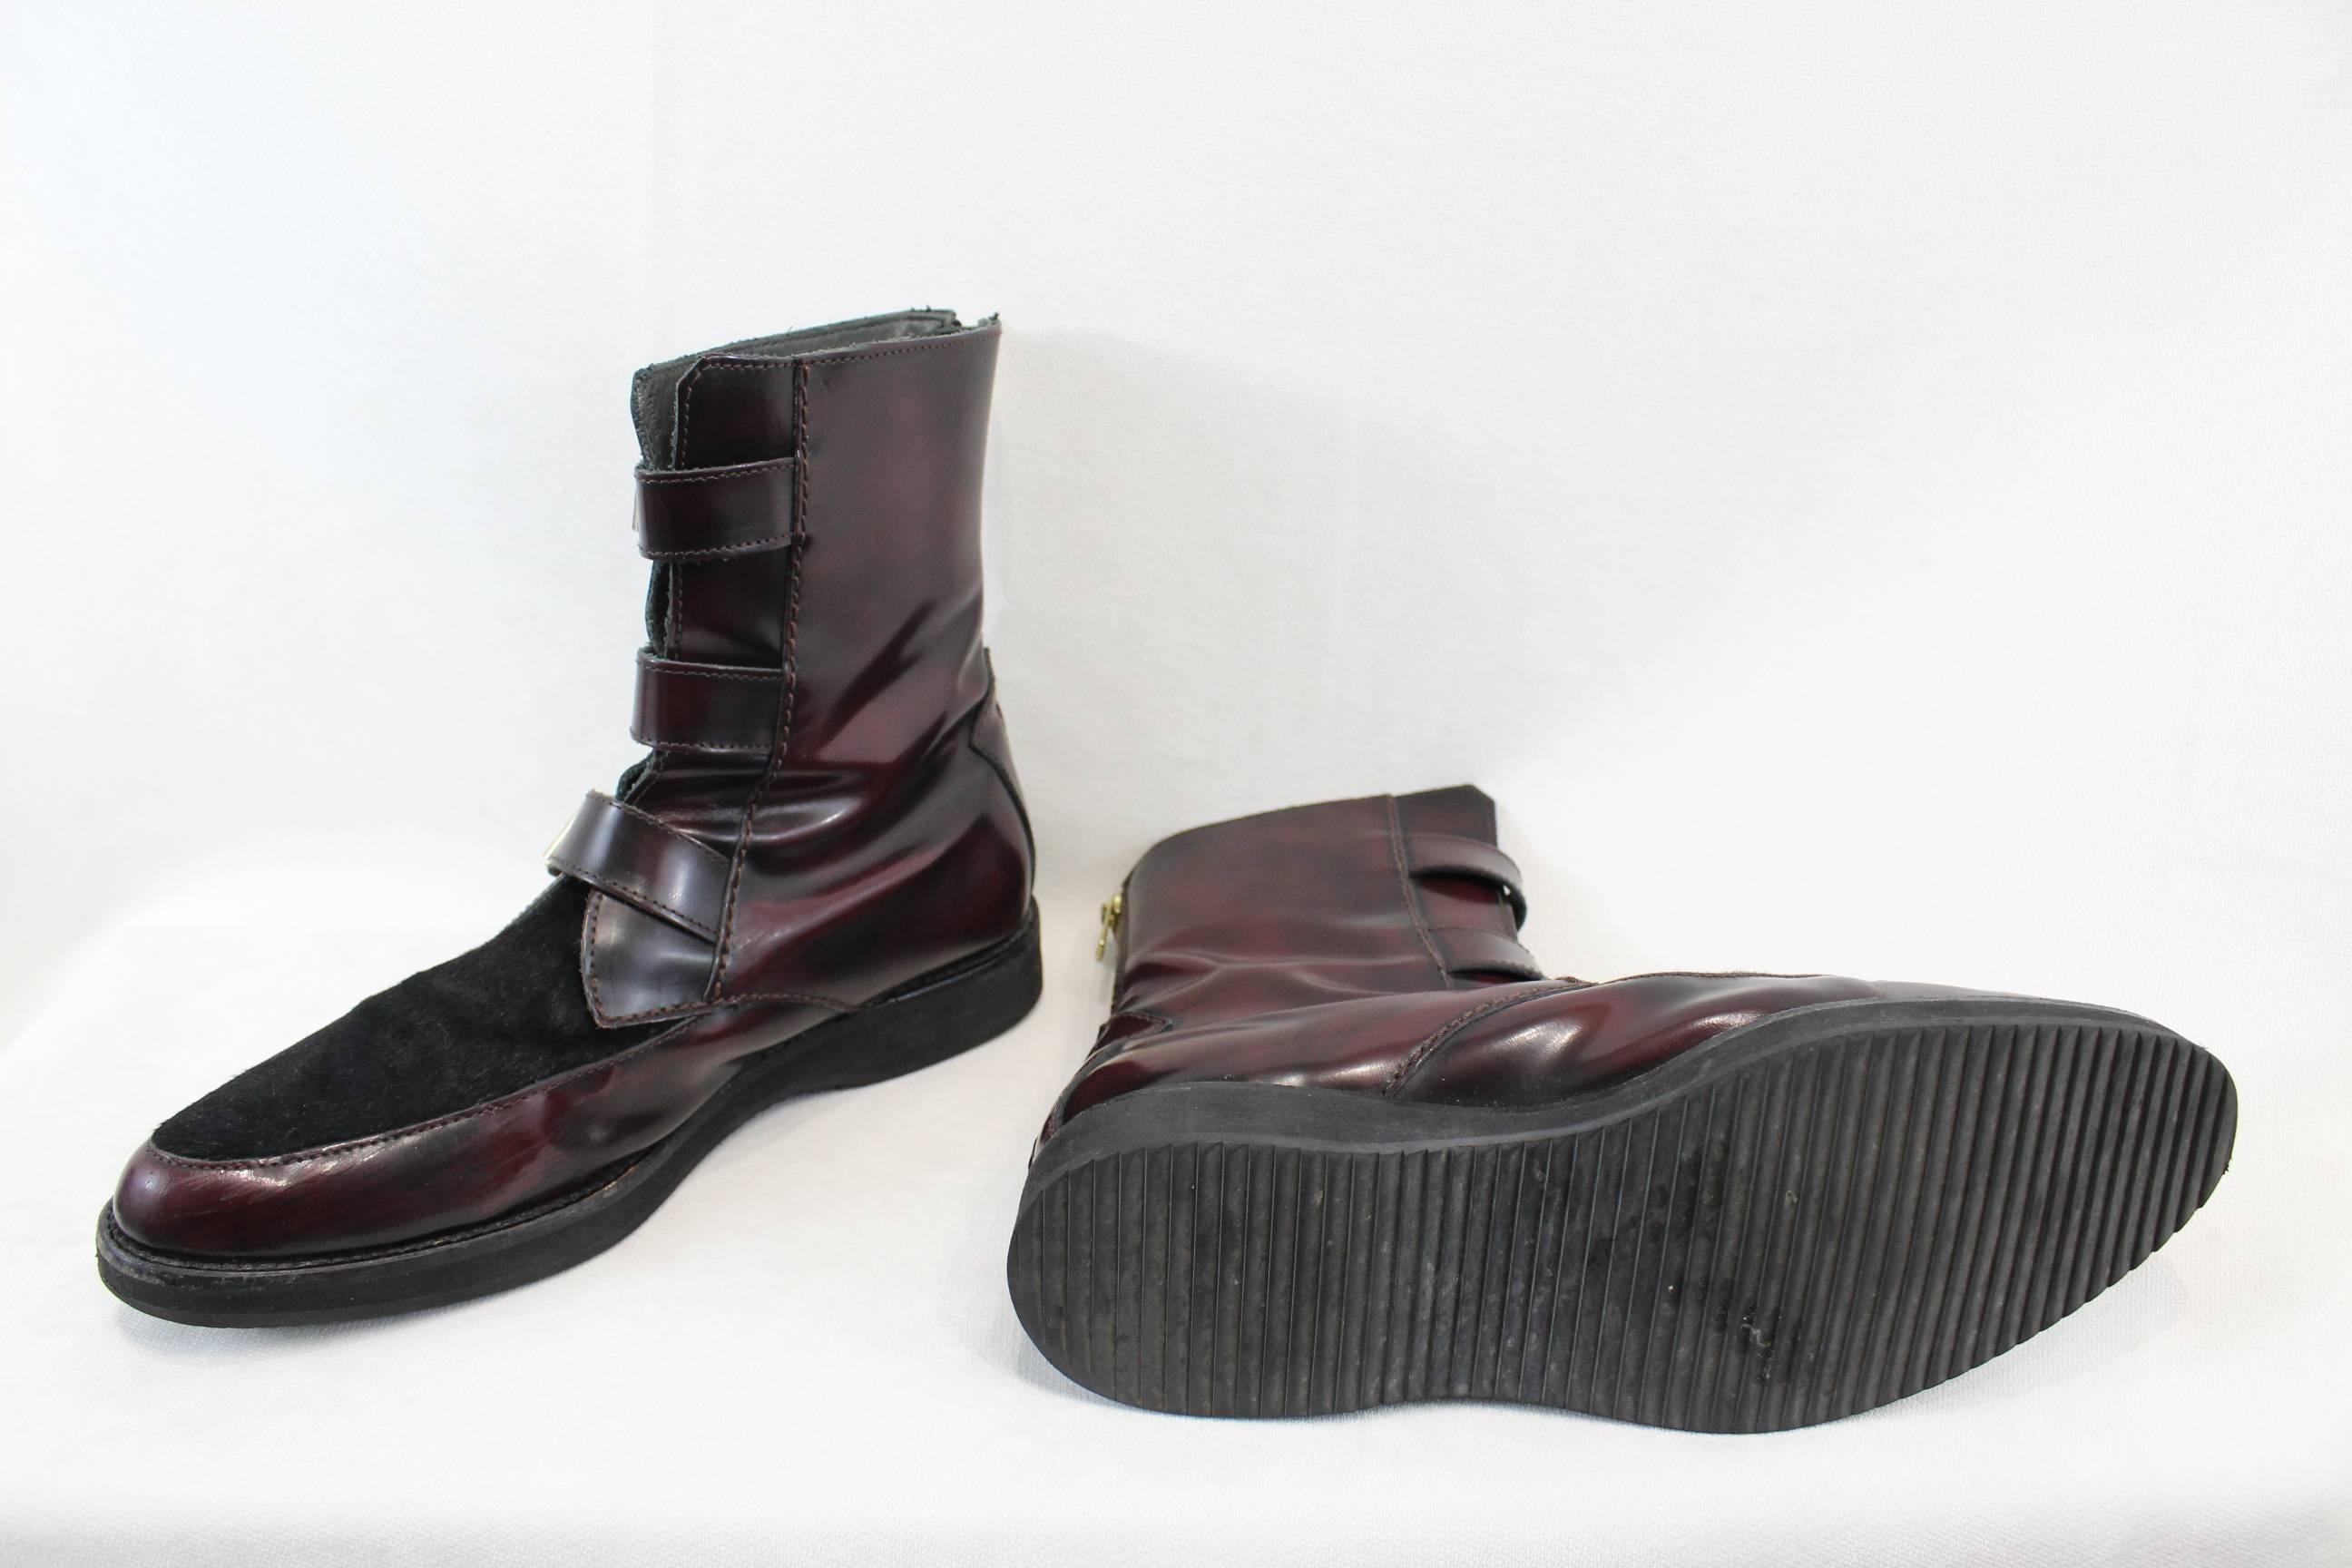 Women's or Men's Amazing Boots from Alexander McQueen in Dark Red Patented  and Calfskin leather For Sale